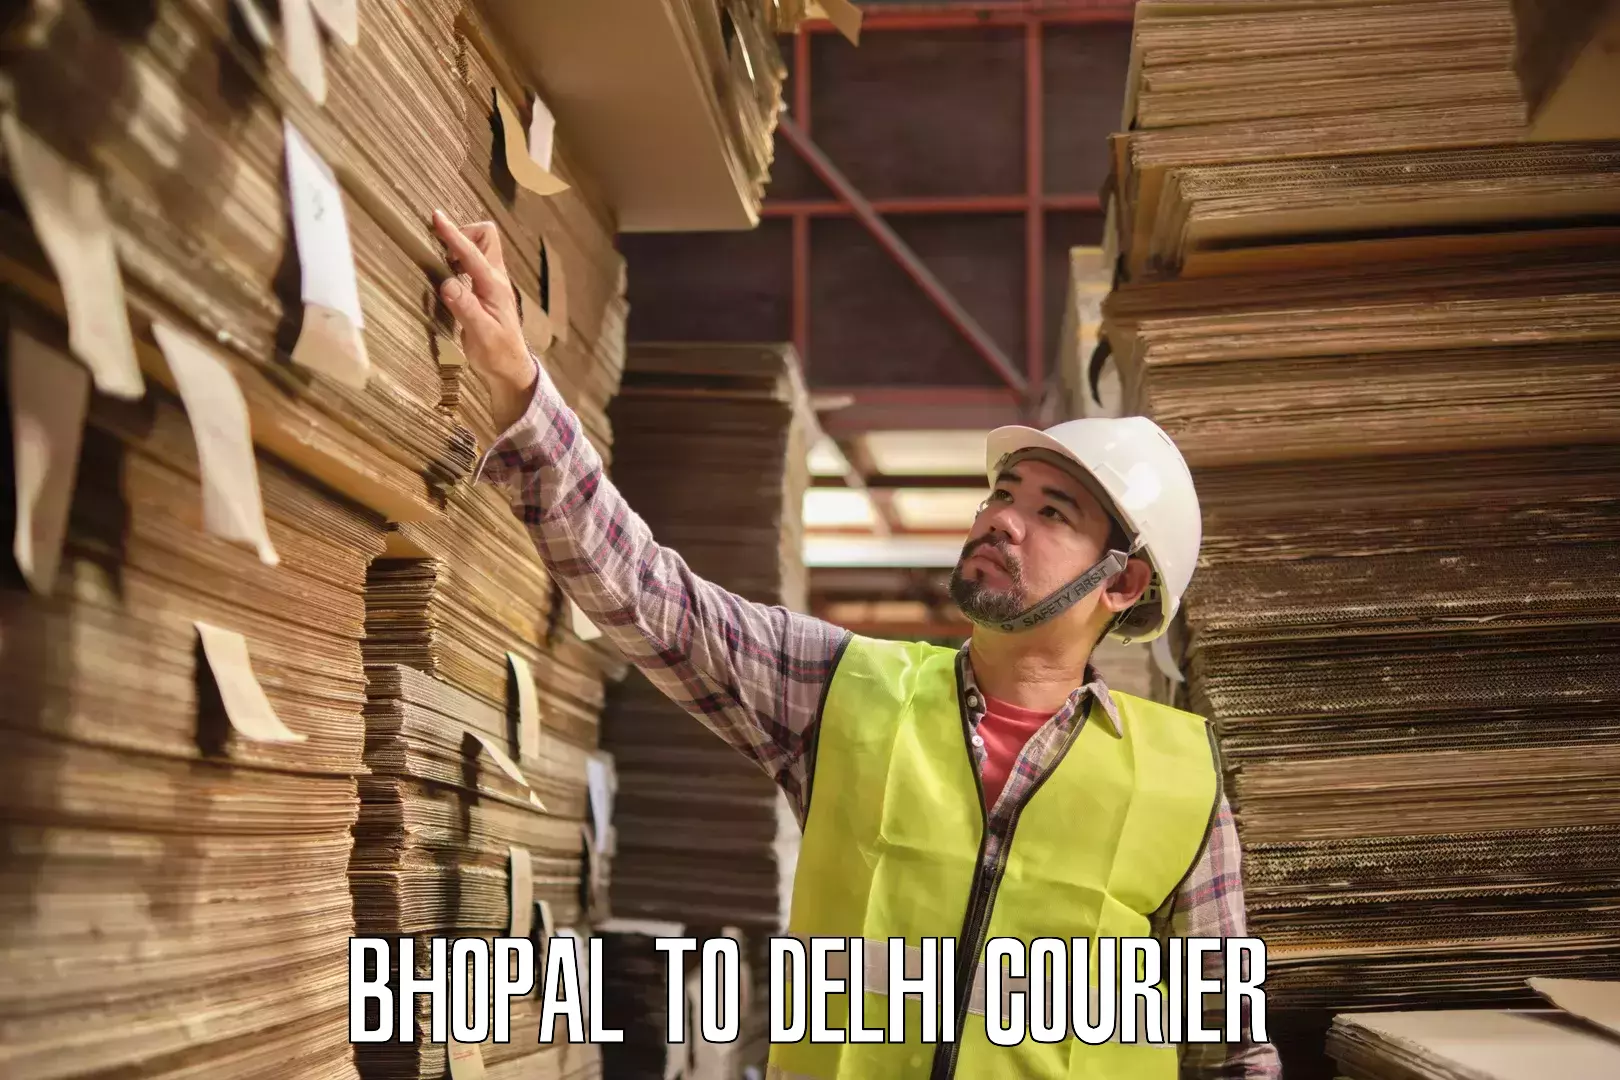 Easy access courier services in Bhopal to Burari